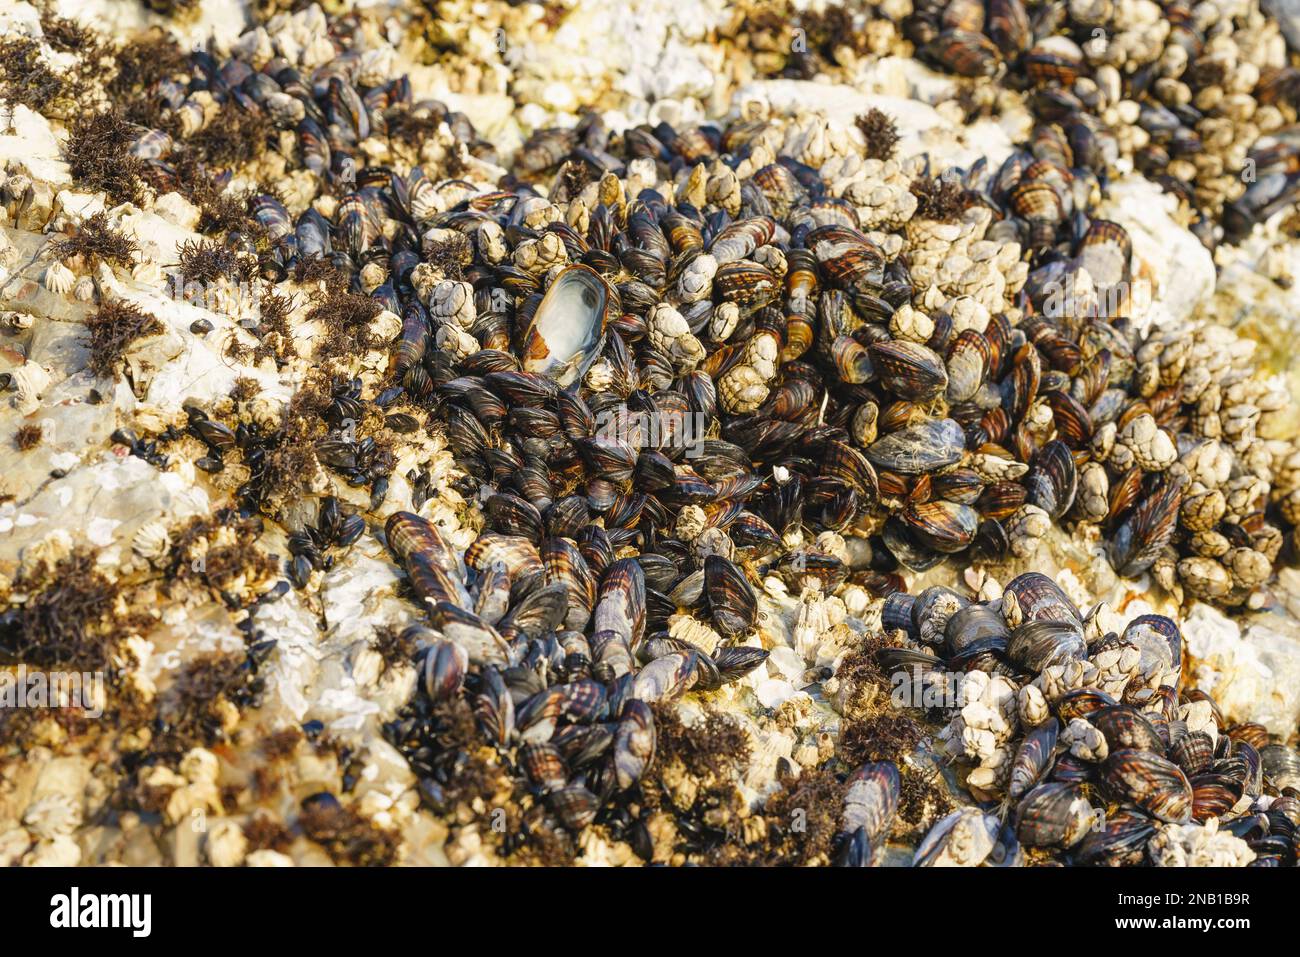 Goose barnacles, or stalked barnacles or gooseneck barnacles, are filter-feeding crustaceans attached to rocks at Avila Beach, California Stock Photo